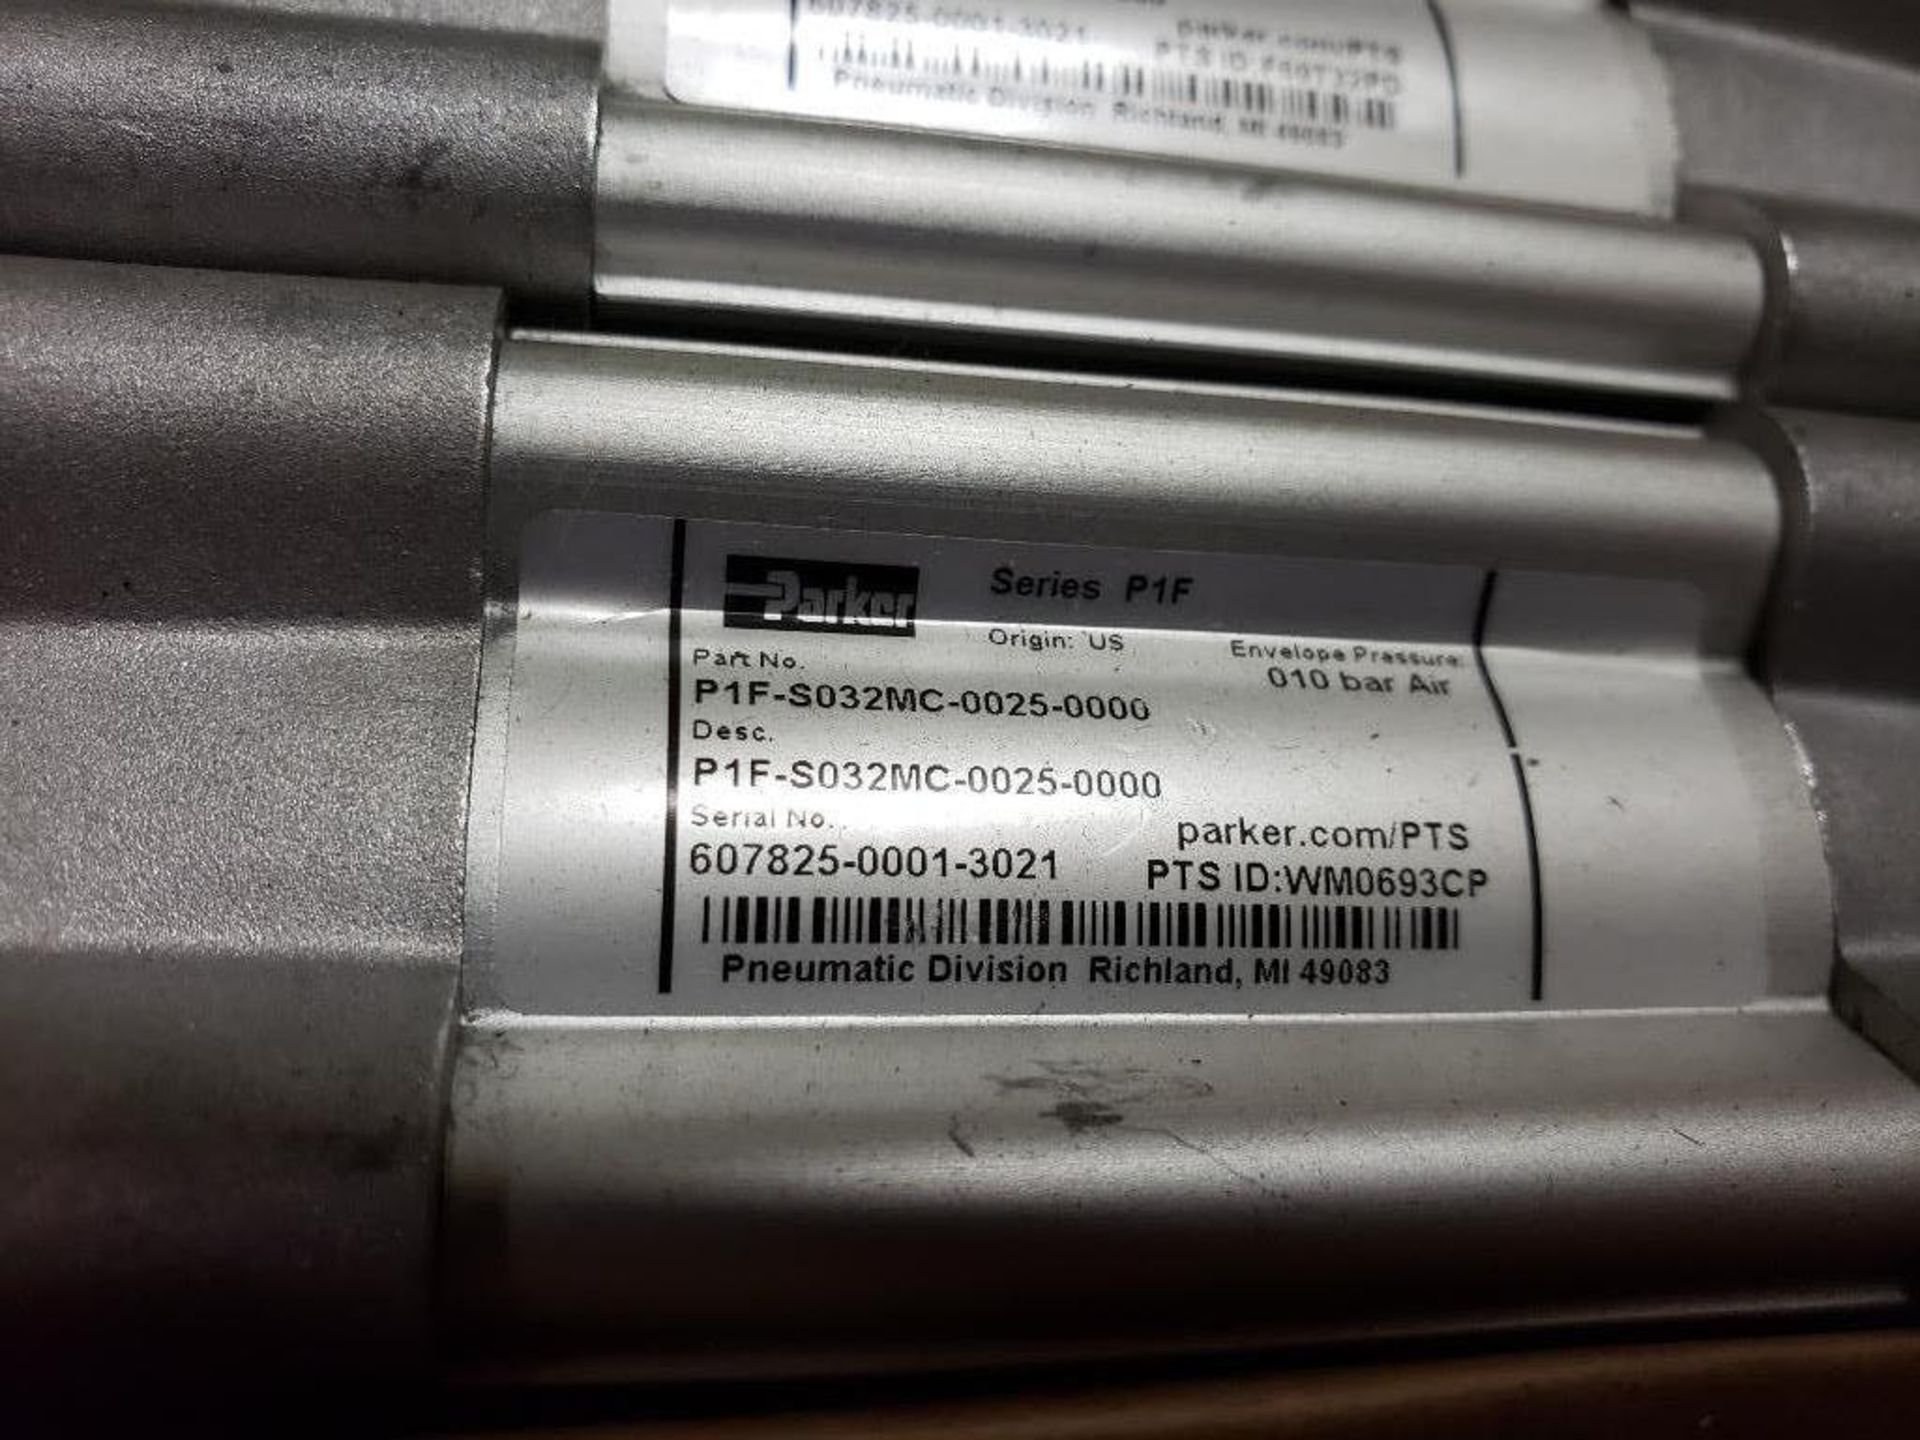 Qty 6 - Parker P1F-S032MC-0025-0000 pneumatic cylinder. - Image 4 of 4